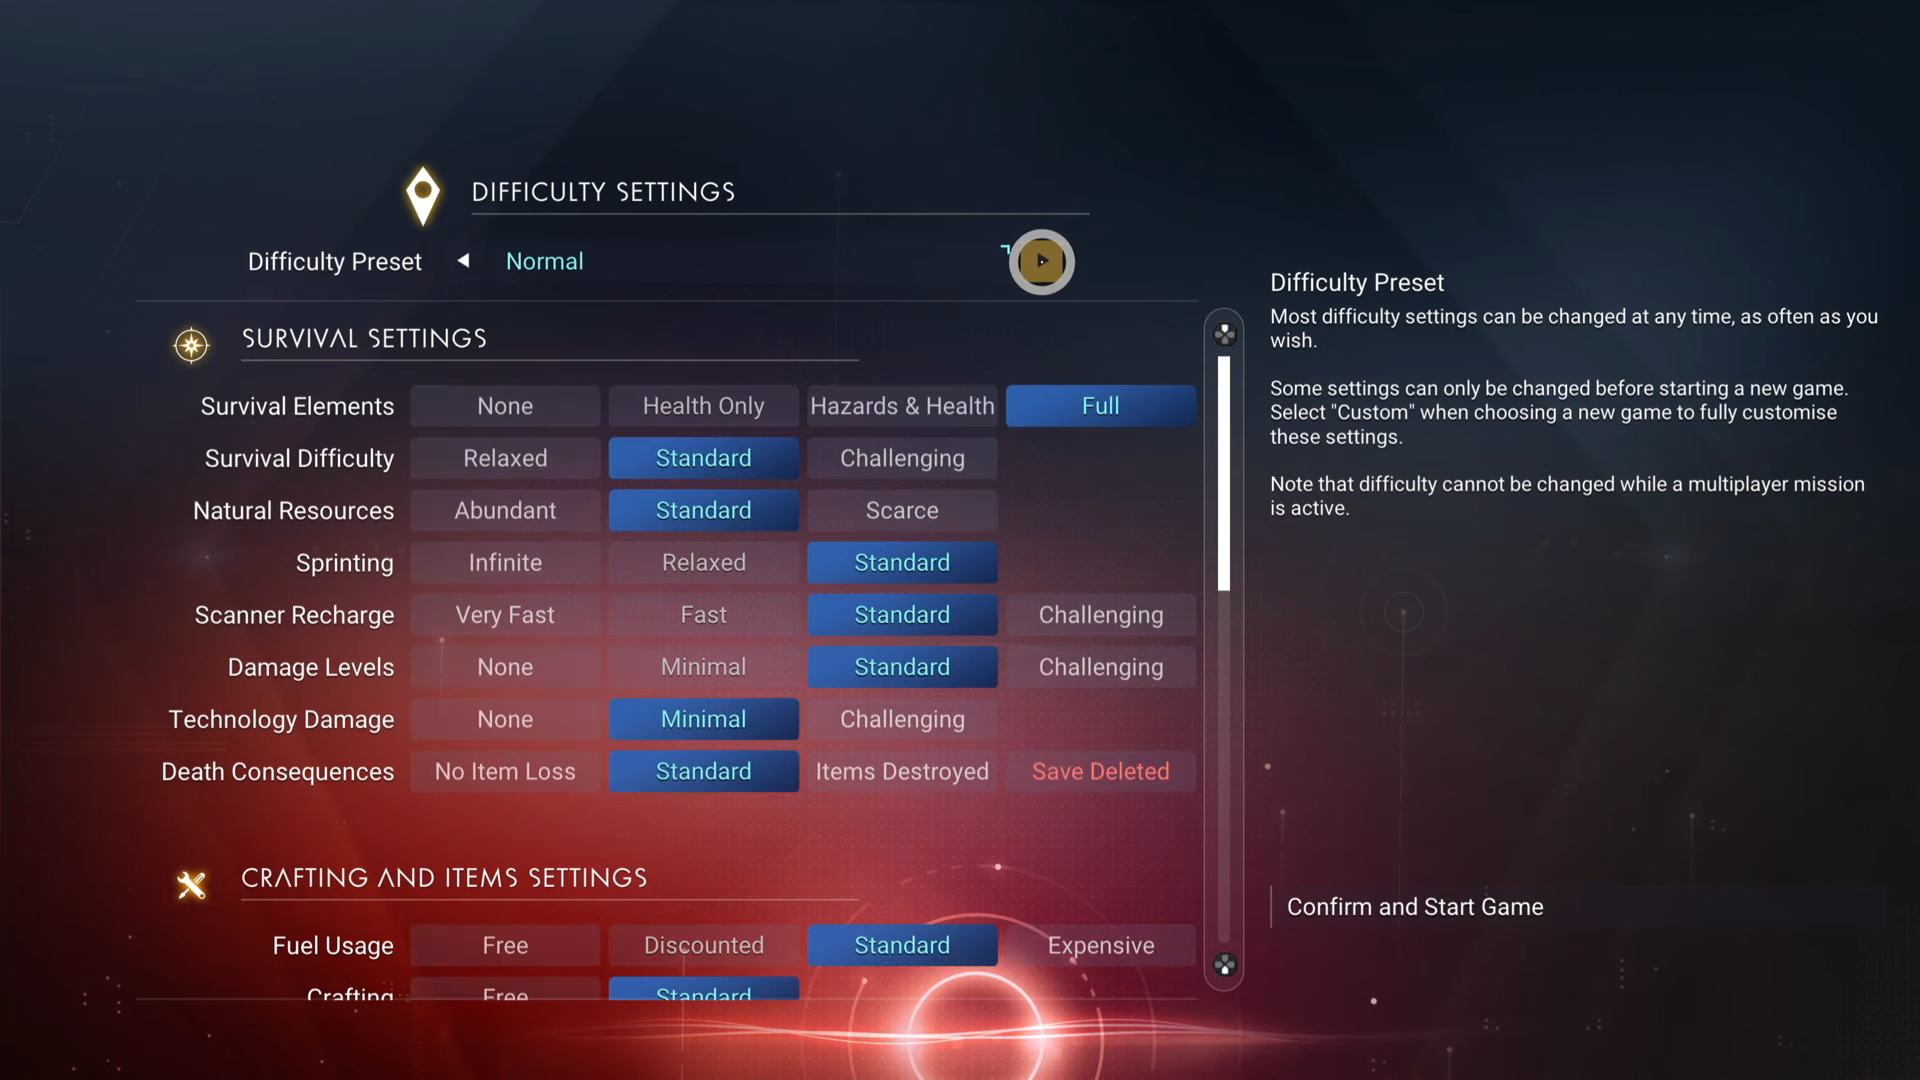 No Man's Sky: The Range Of Options For The Custom Game Settings